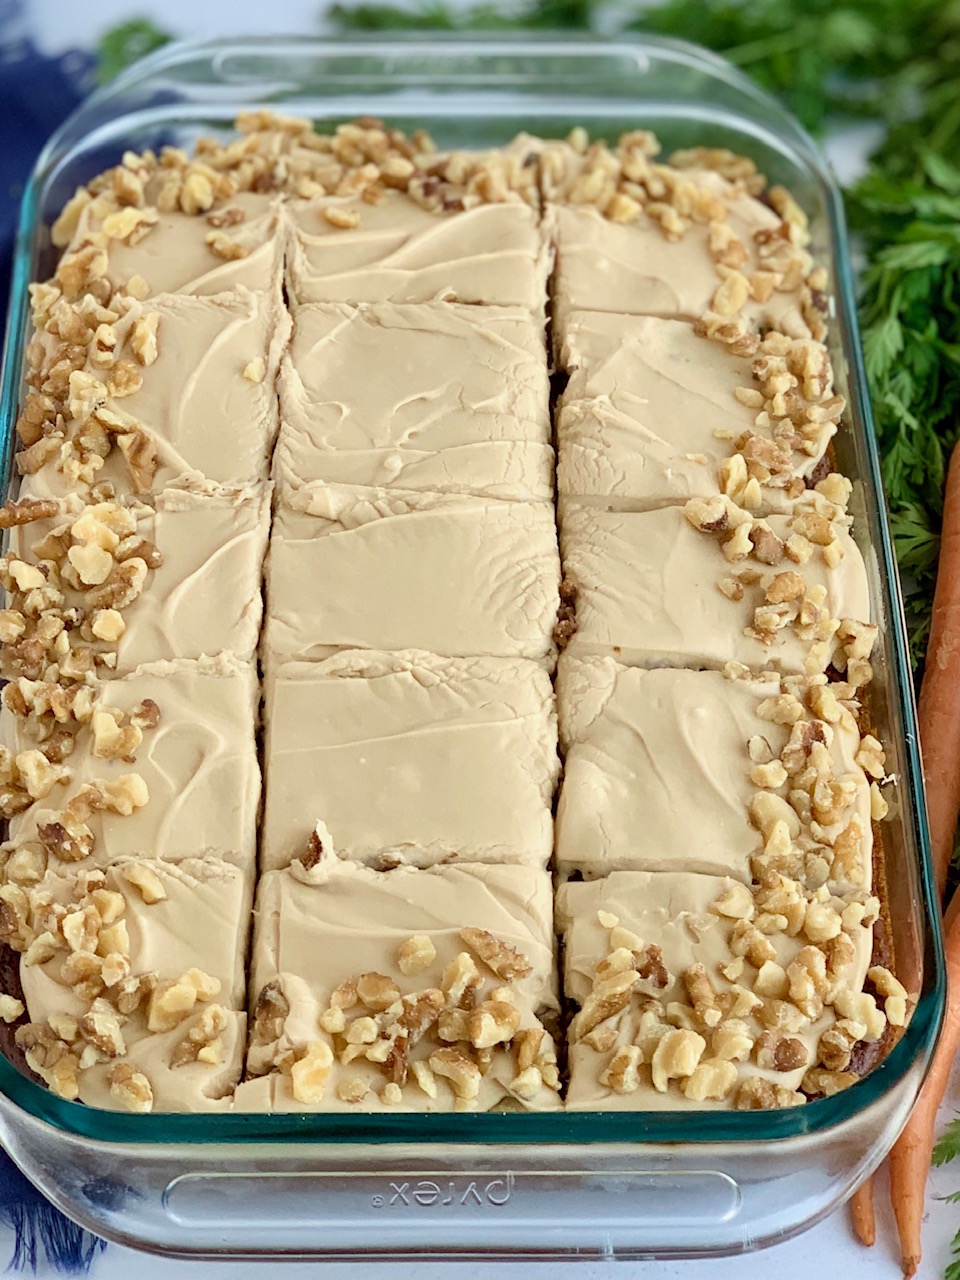 A 9 x 13" baking pan filled with a shredded cake mixture with unsweetened applesauce, crushed pineapple, and topped with a creamy brown sugar cream cheese frosting and chopped walnuts around the outside edge of the cake next to a bunch of carrots.